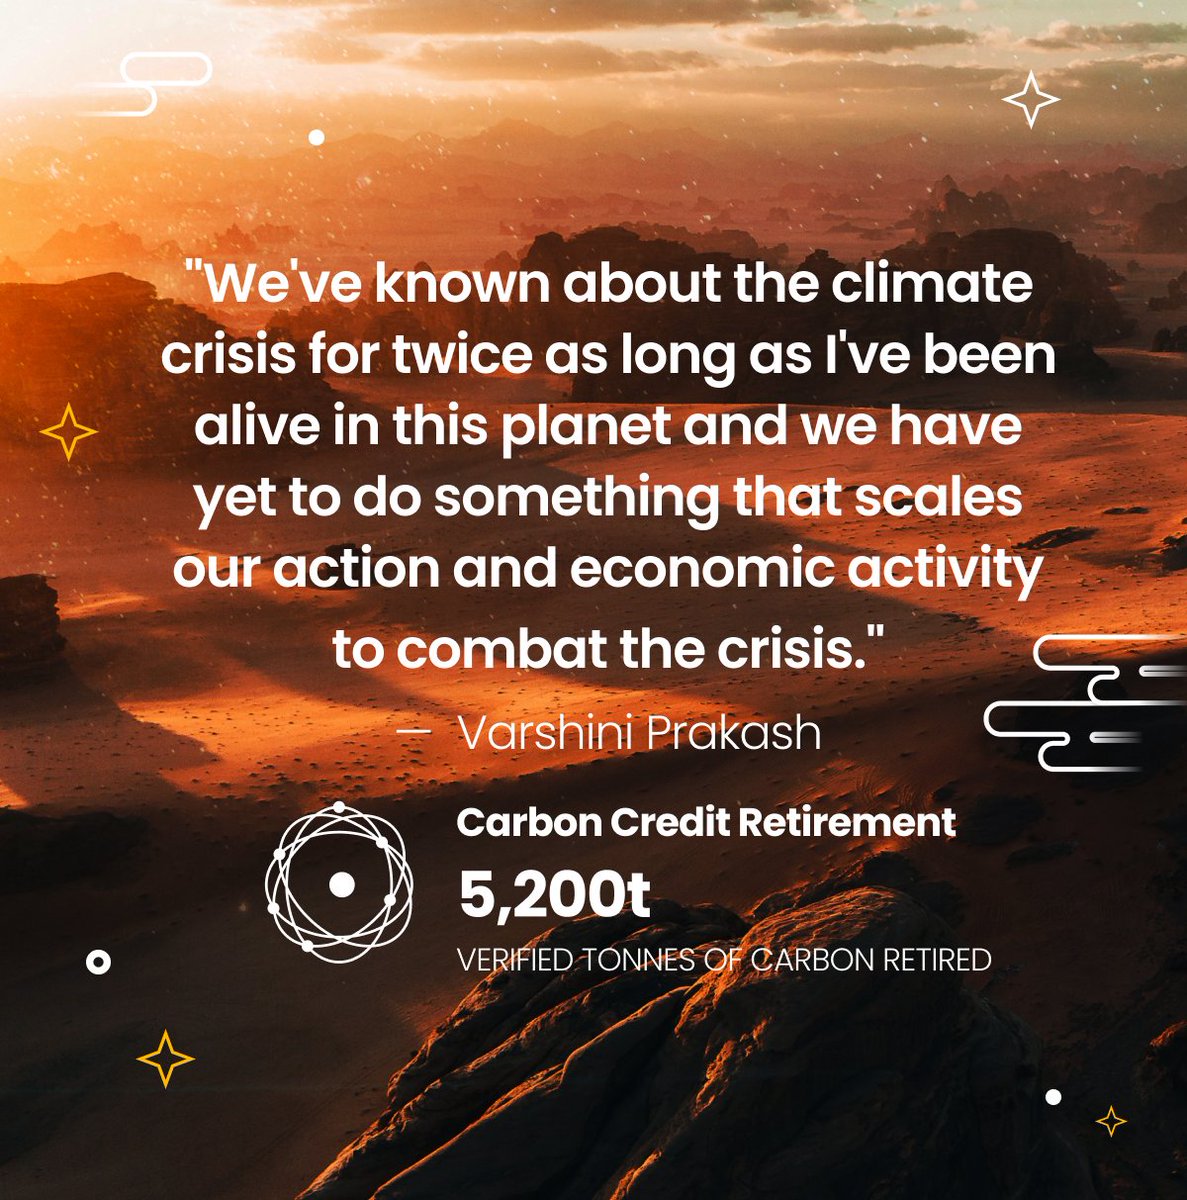 Today KlimaDAO dedicates the retirement of 5,200 carbon tonnes to @sunrisemvmt and @VarshPrakash. It will take a courageous new generation to align the economy with our planet's well-being—a generation that KlimaDAO endeavors to empower through Web3. 👉 klima.fyi/present-14